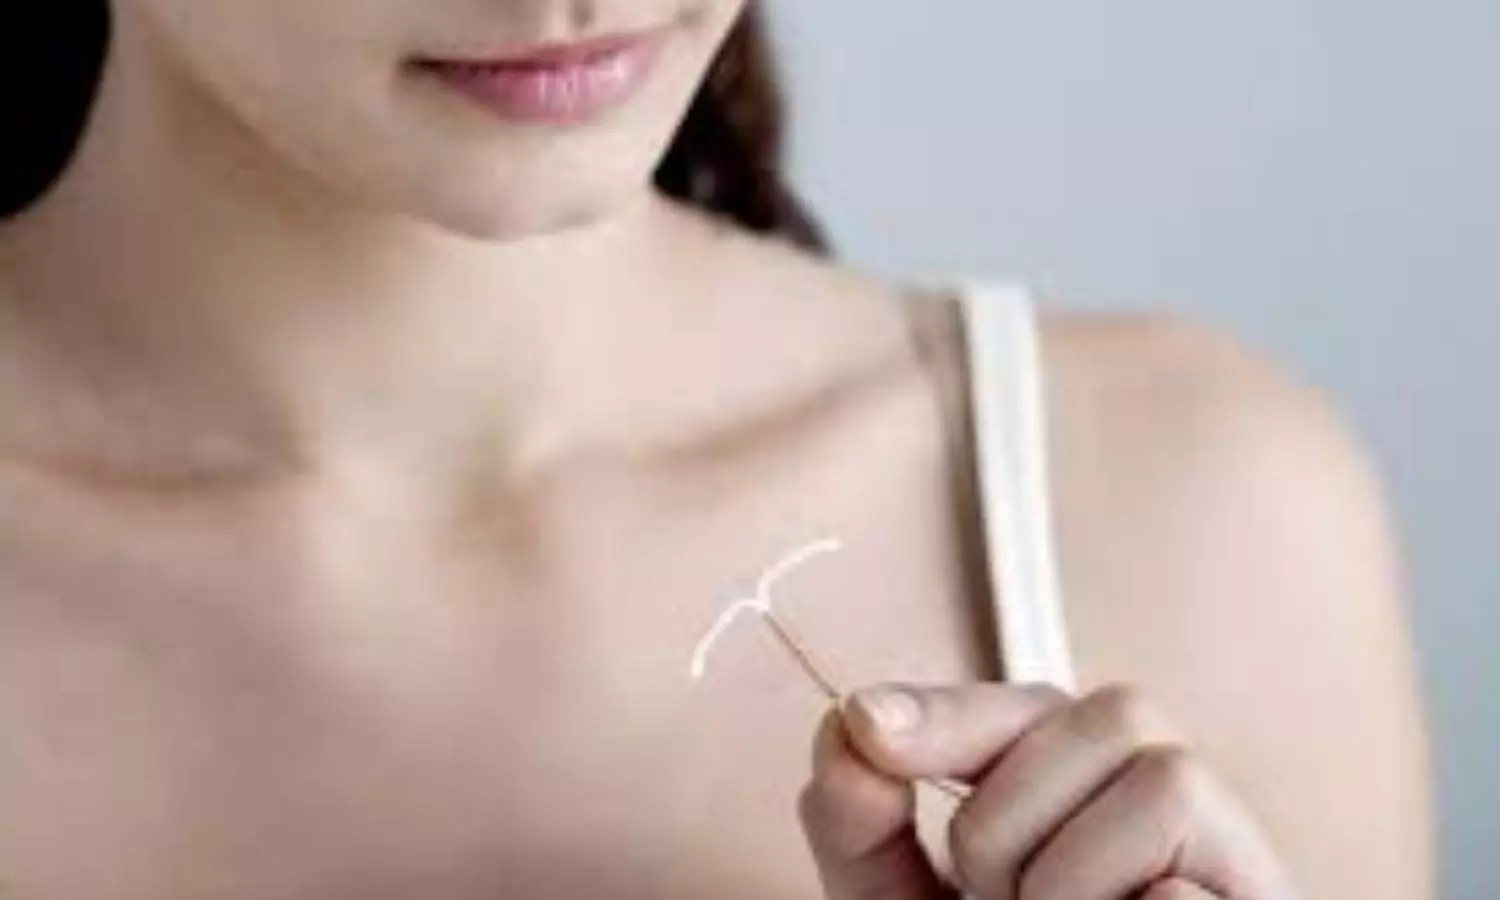 IUDs likelier to be expelled if placed right after childbirth